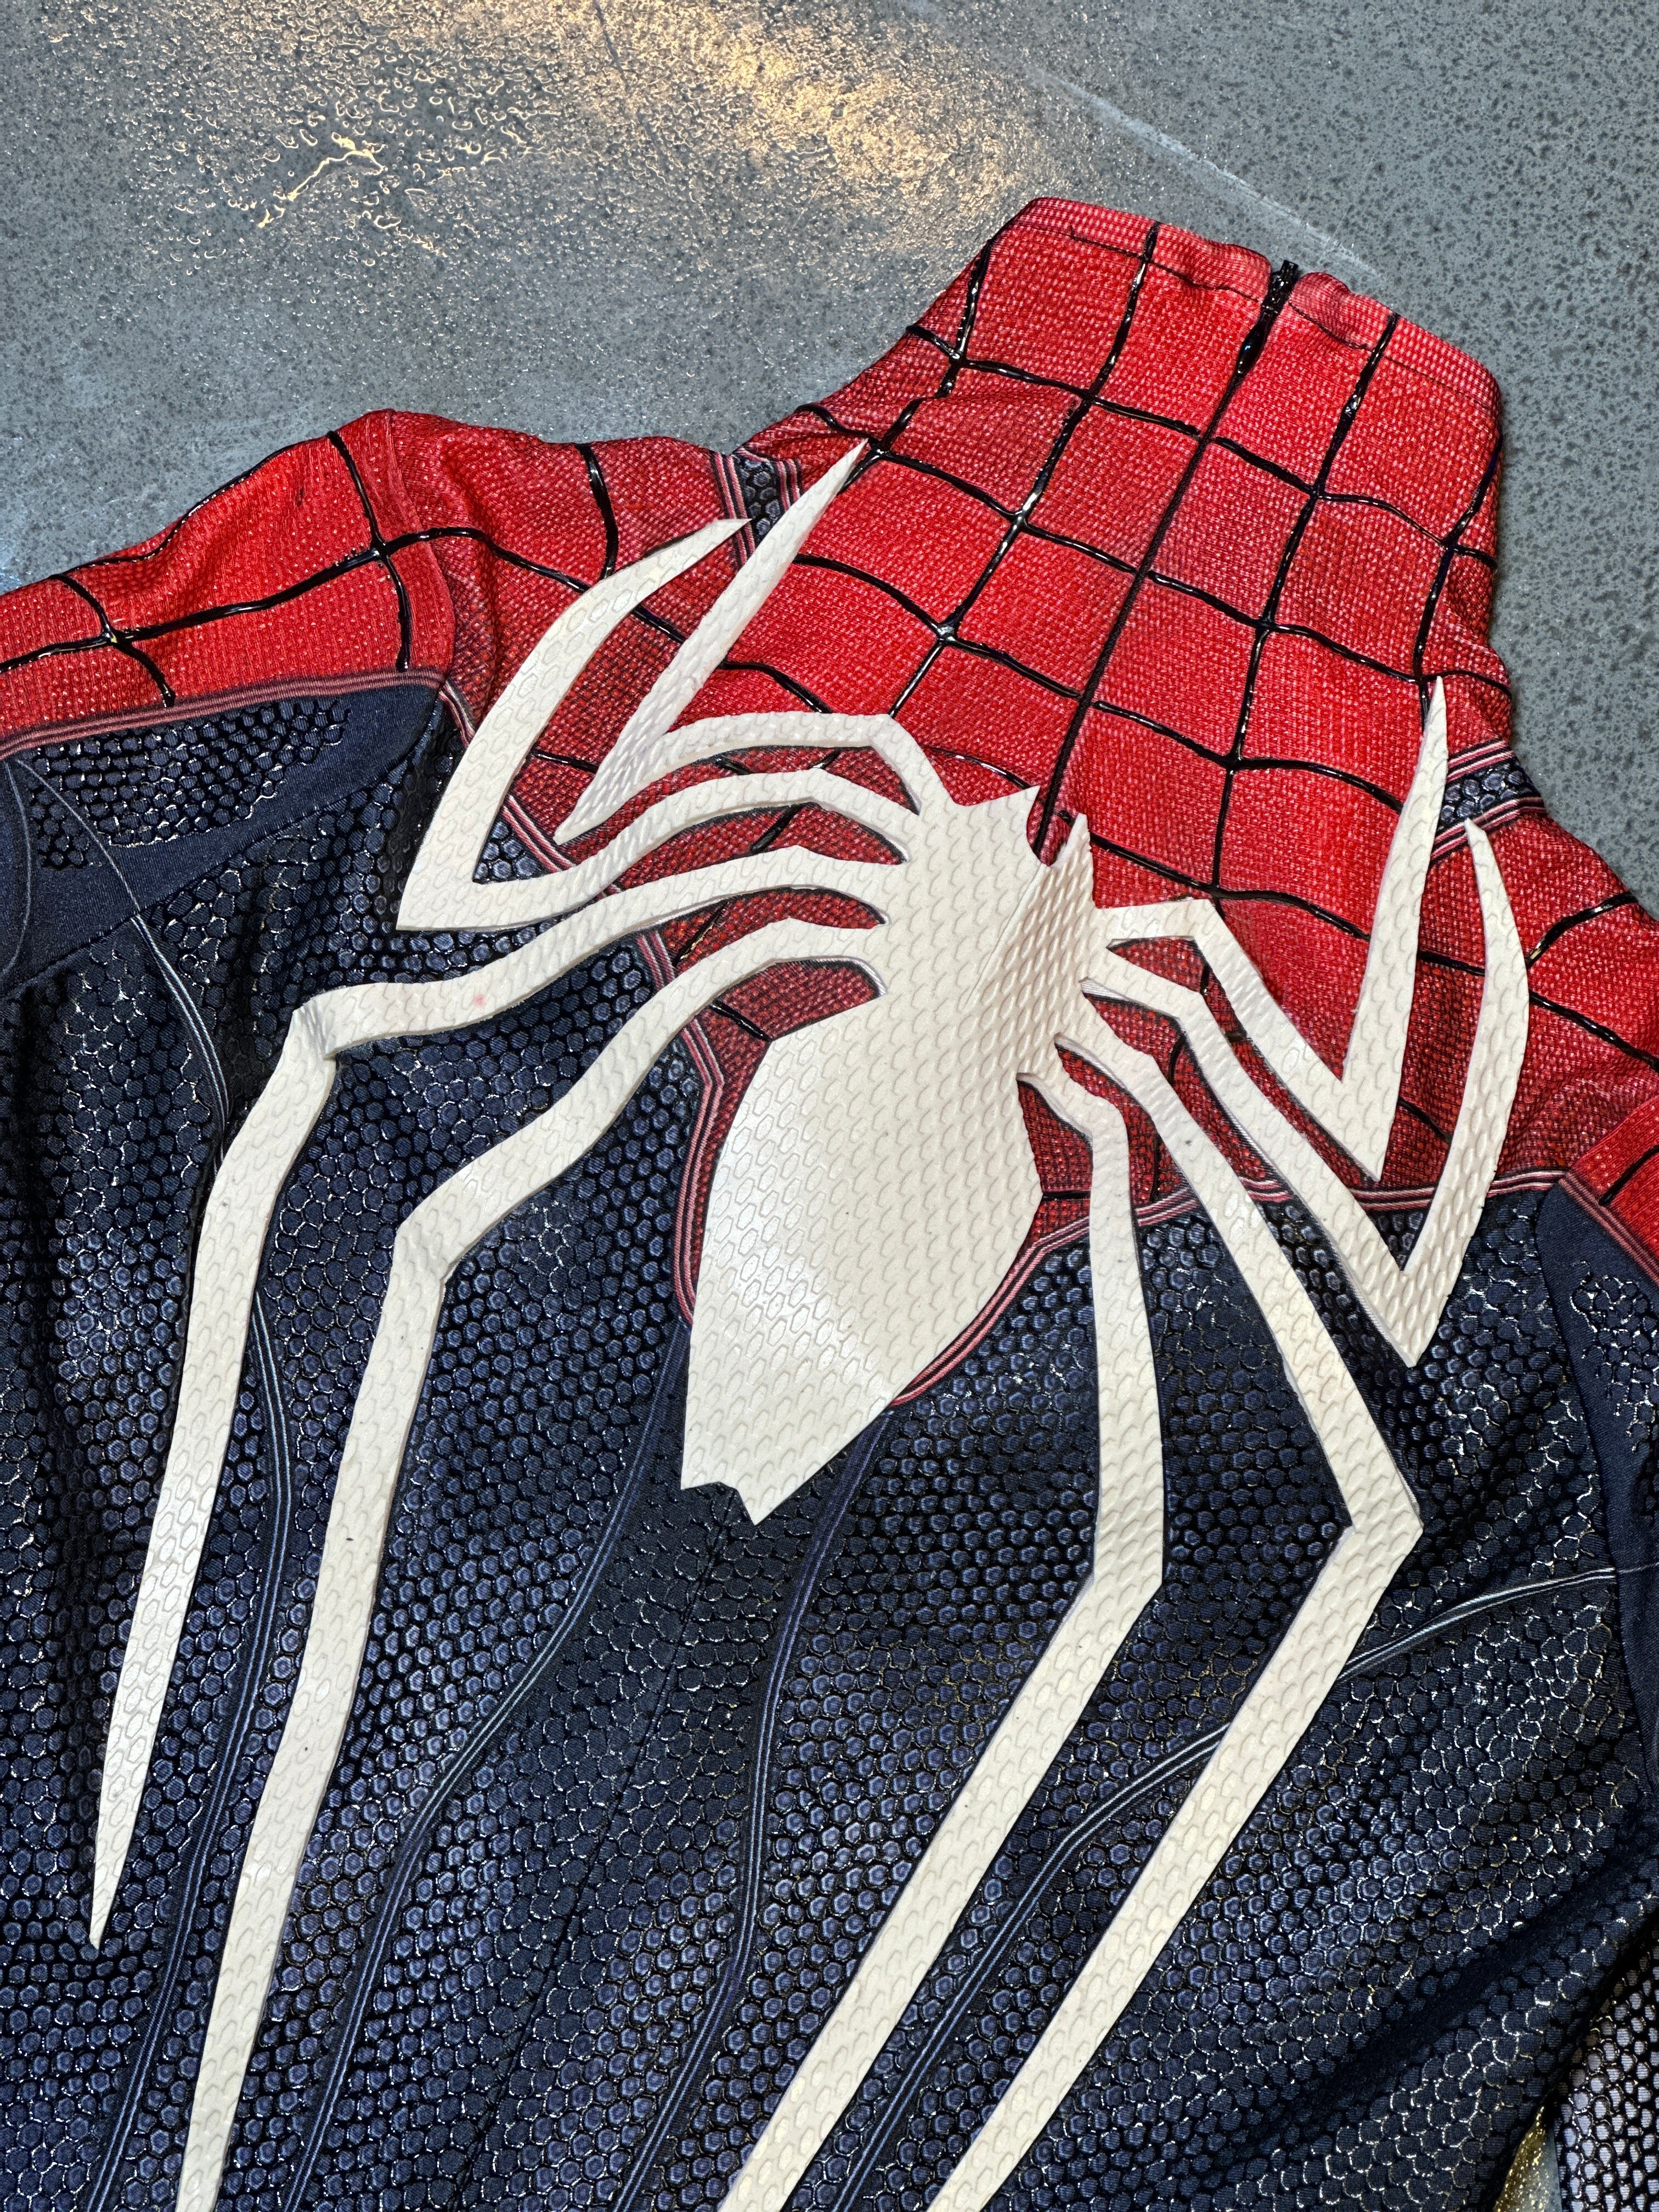 PS4 Spidey suit with Face shell & 3D Rubber Web Movie Prop Replica(wearable)